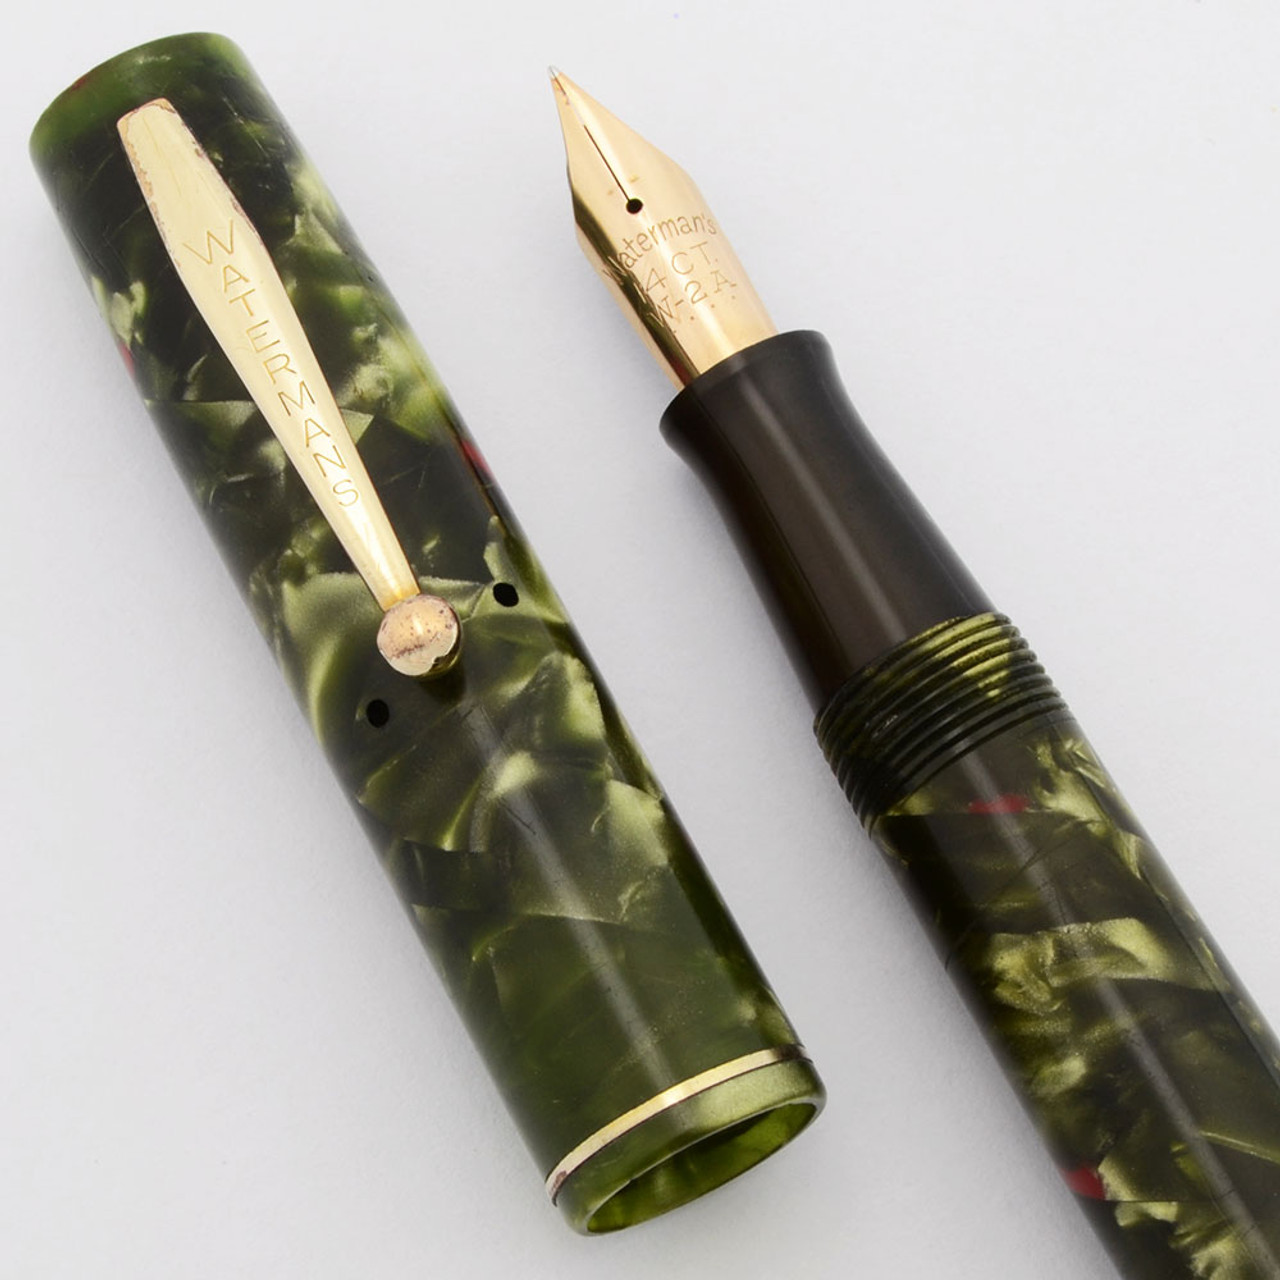 Waterman 52 Fountain Pen (Canada, 1930s/40s) - Green and Red Marble Celluloid, Fine 14k W-2A Nib (Excellent, Restored)